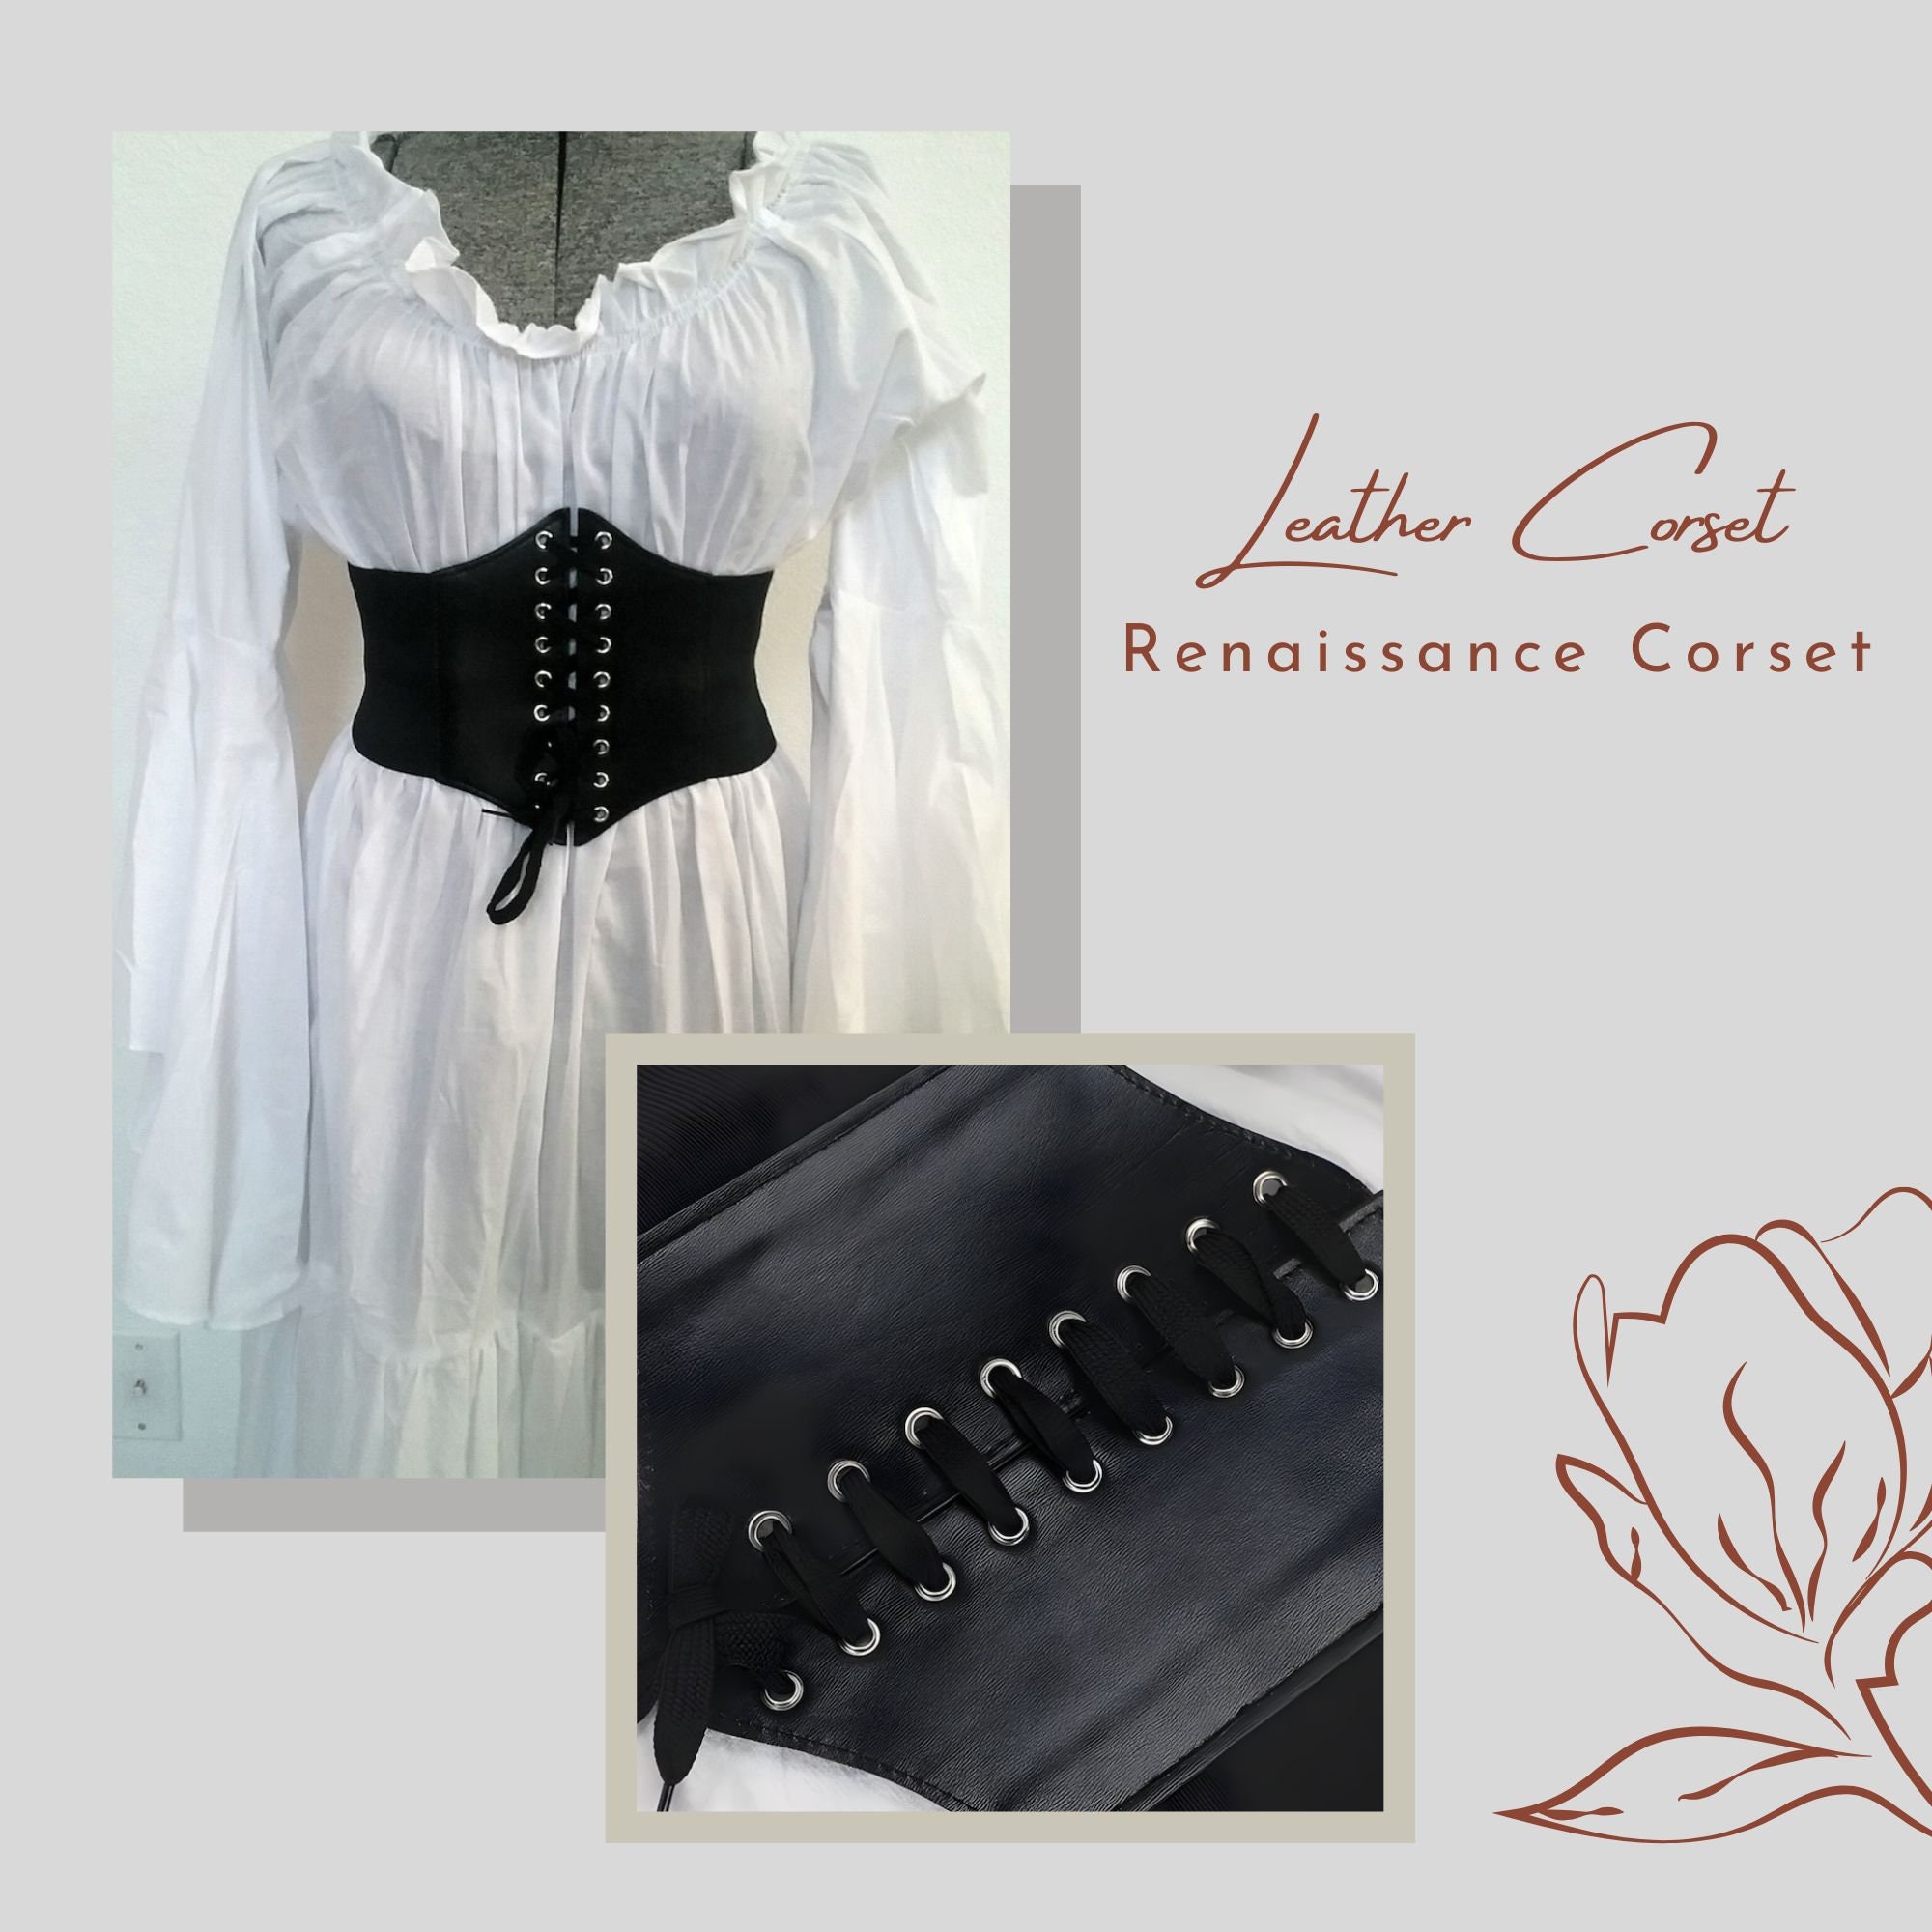 Wide Belt/waist Cincher With Corset Closure. Perfect for Steampunk, Goth,  Pagan, Victorian or Fantasy Outfit. Harness Made With EVA Foam 